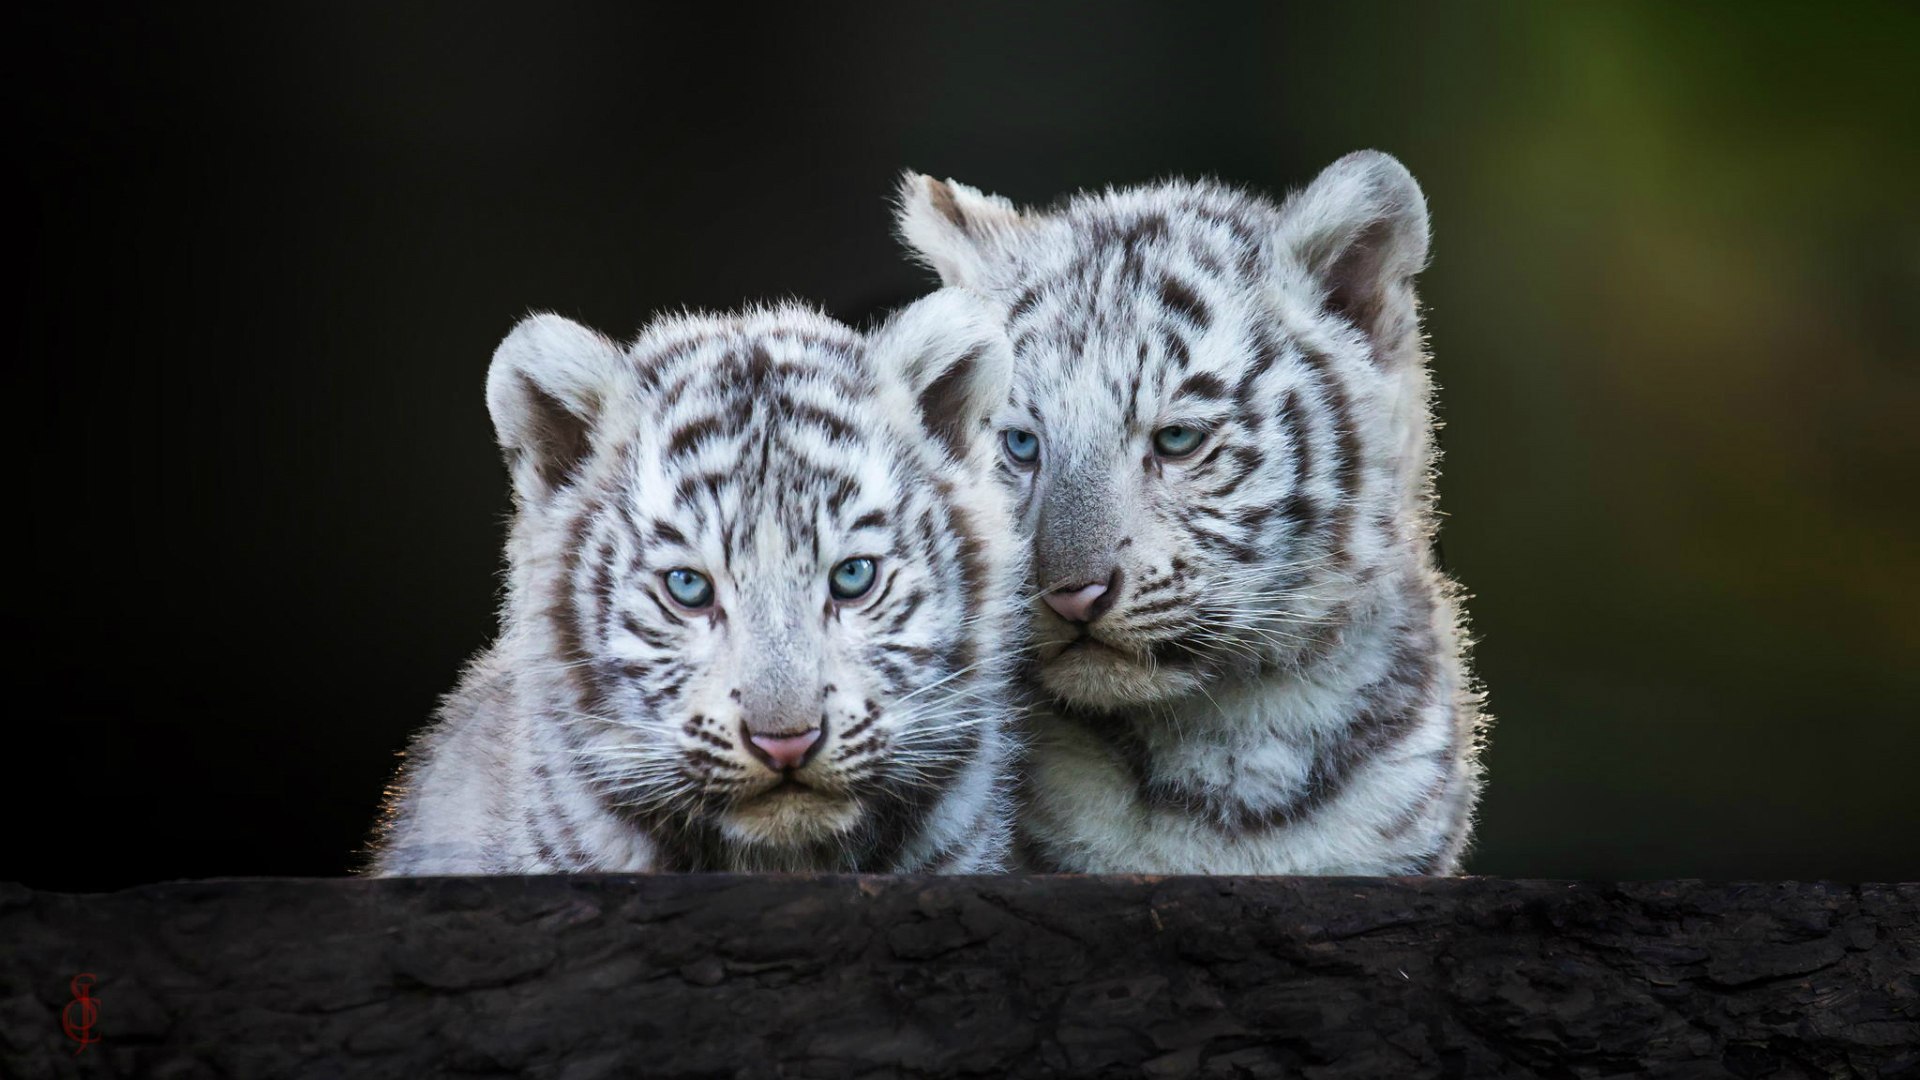 White Tigers Cubs Wallpaper Image